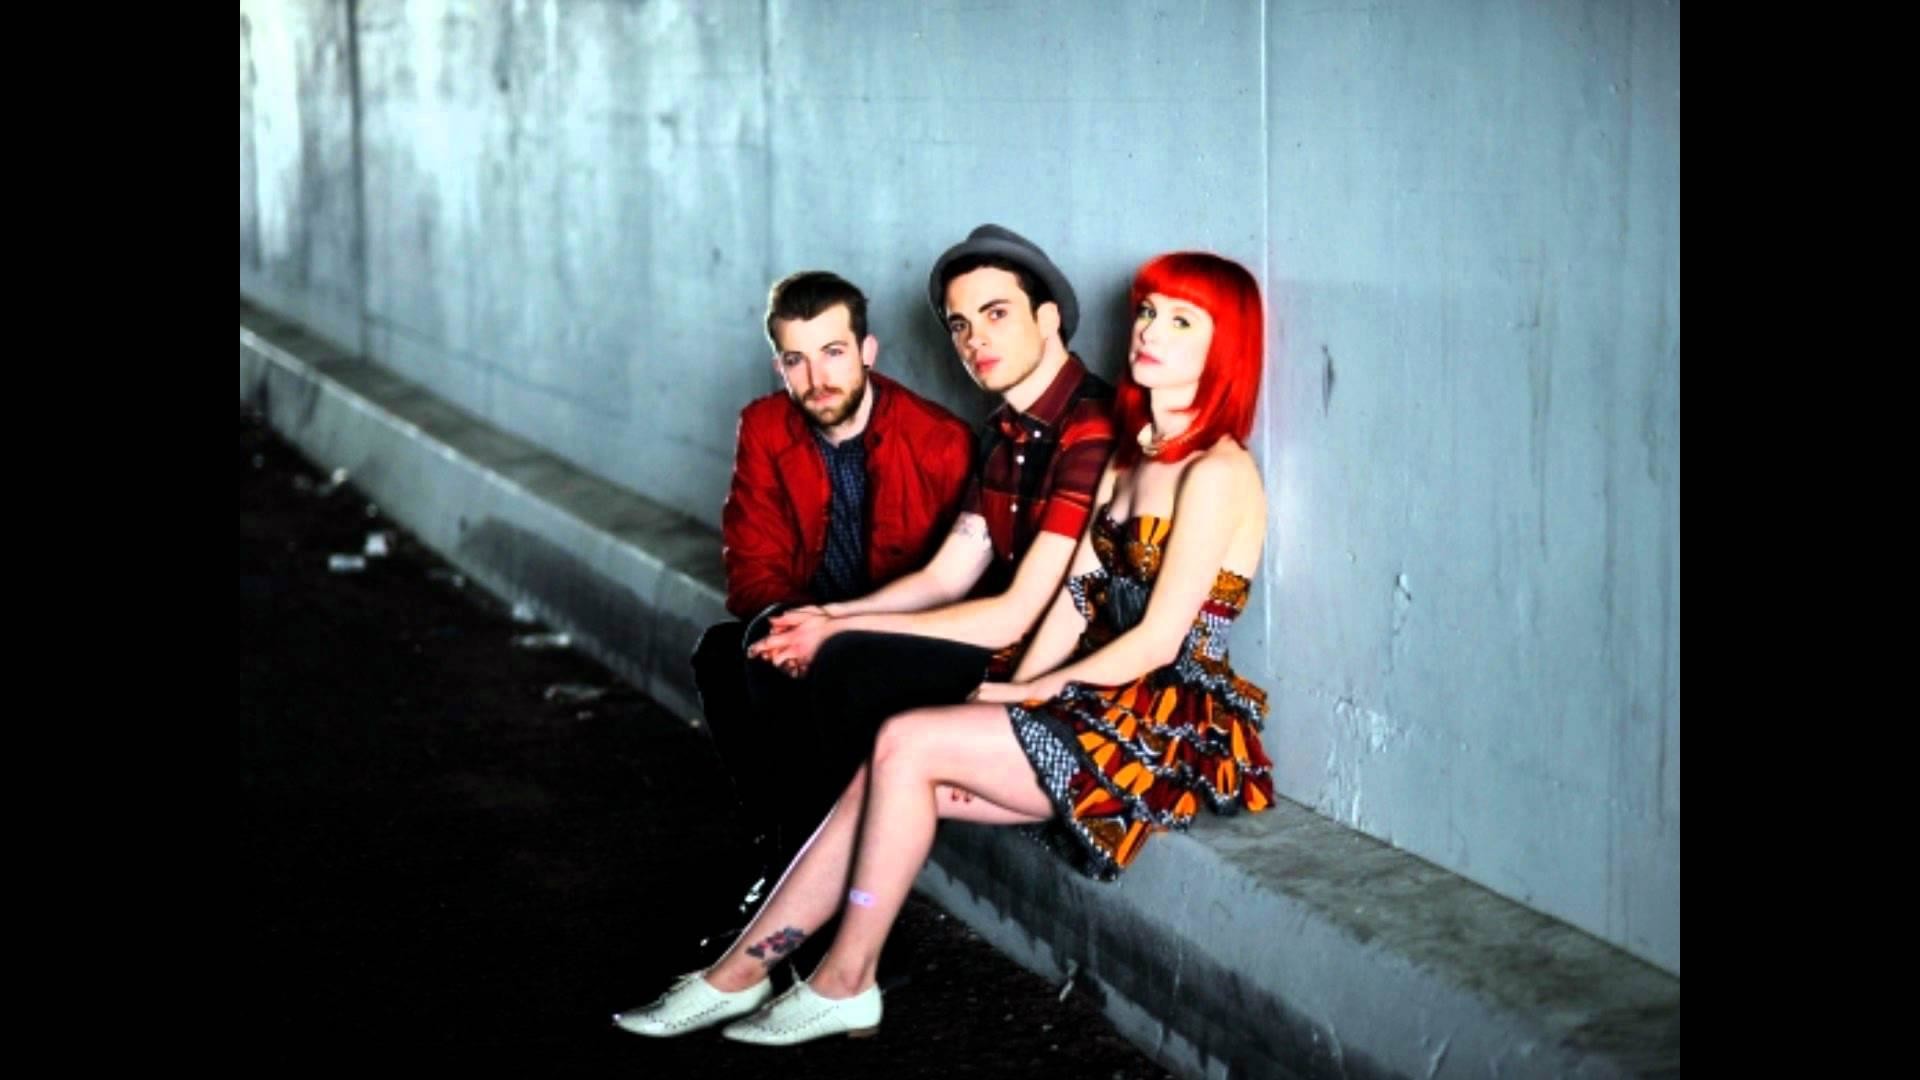 1920x1080 Paramore HD Desktop Wallpapers for Widescreen, High Definition .